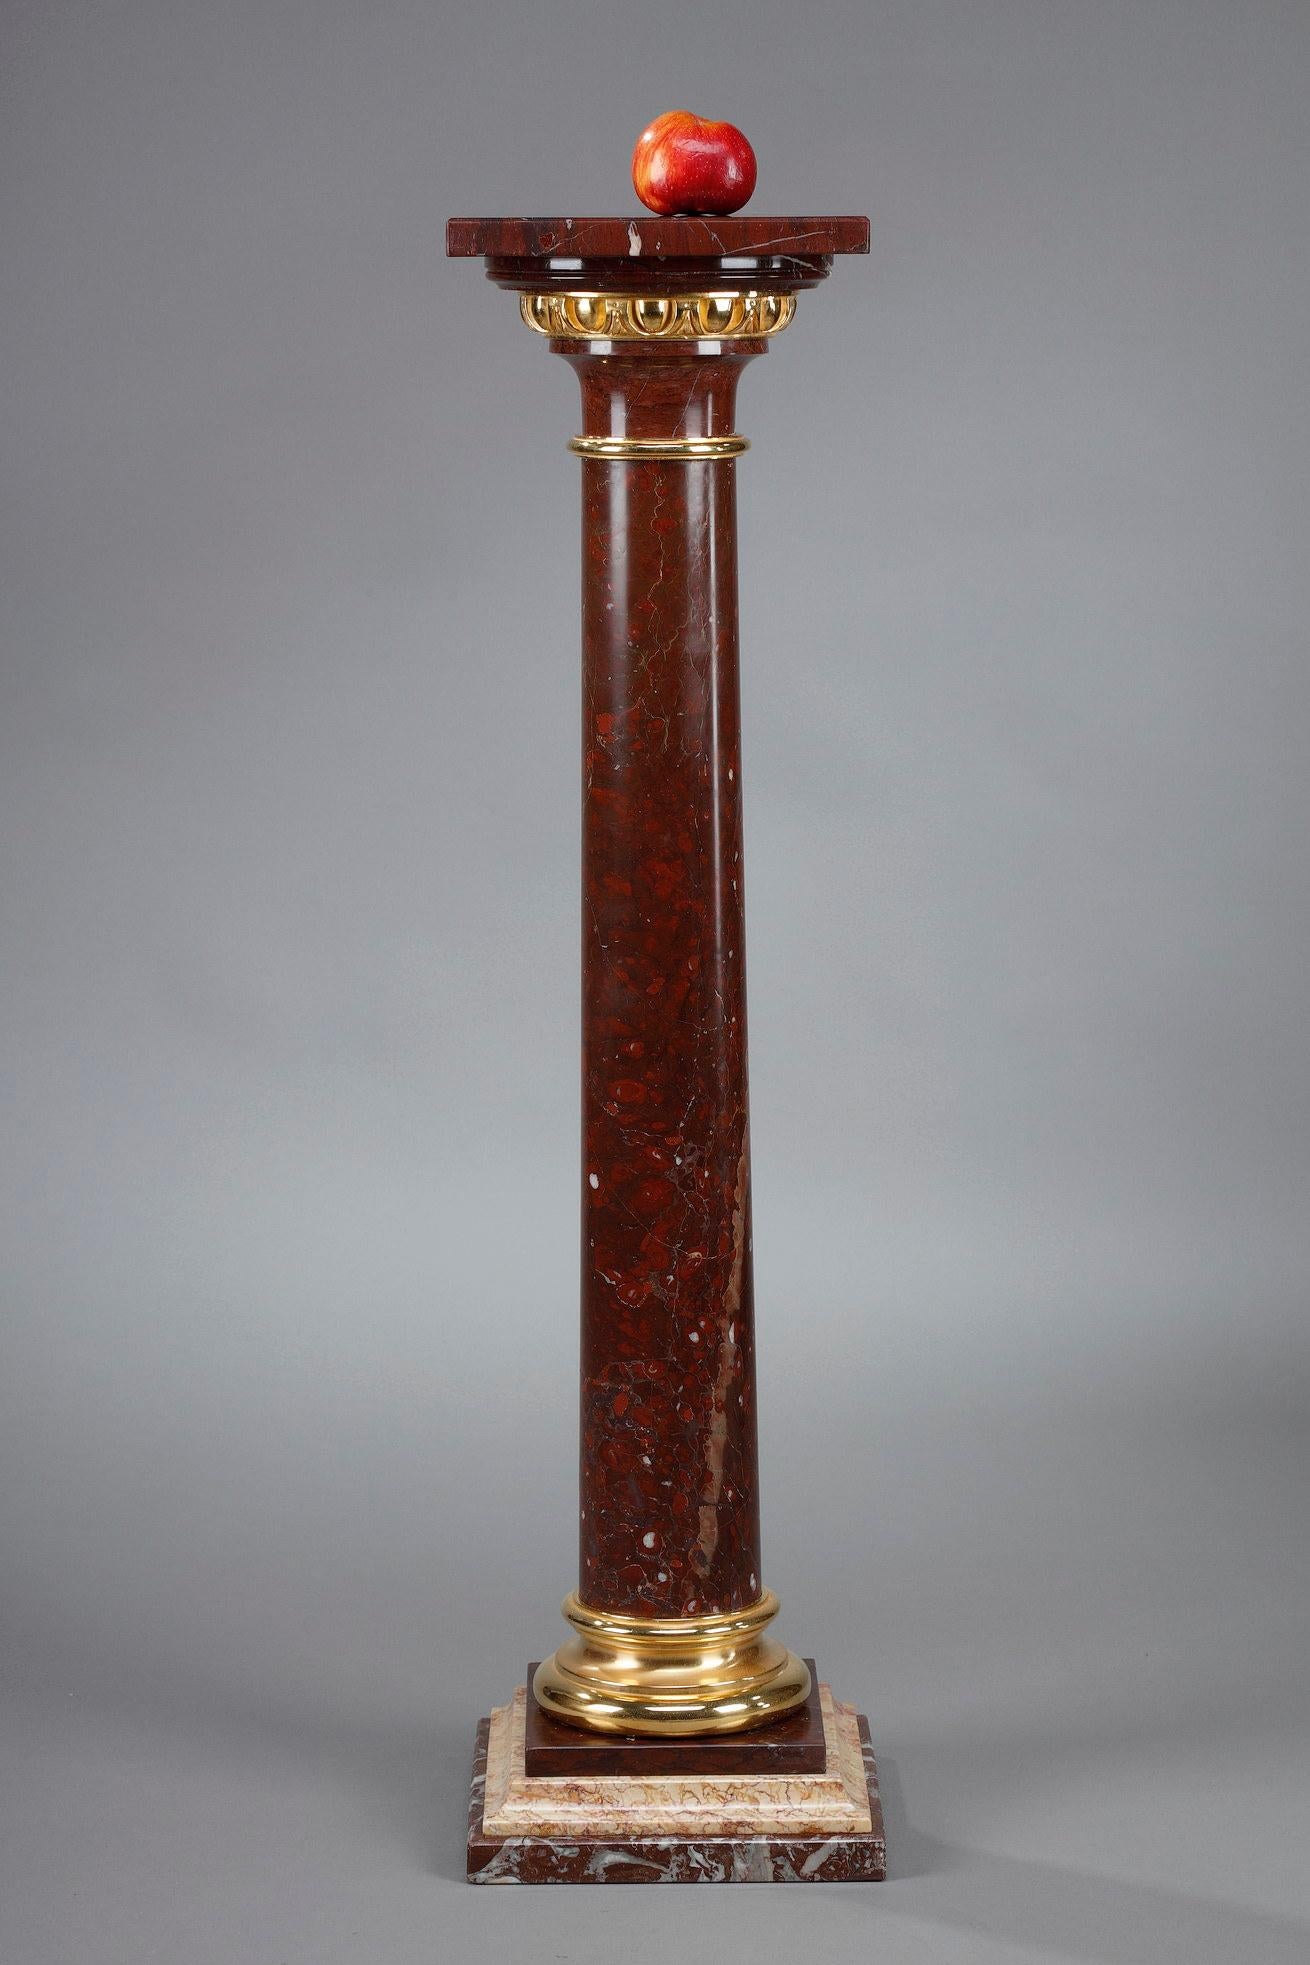 A late 19th century column in griotte red marble with a circular shaft topped by an Ionic capital composed of a bronze moulding decorated with oves hosting the square top. The attic base is composed of three quadrangular tiers of different red, pink